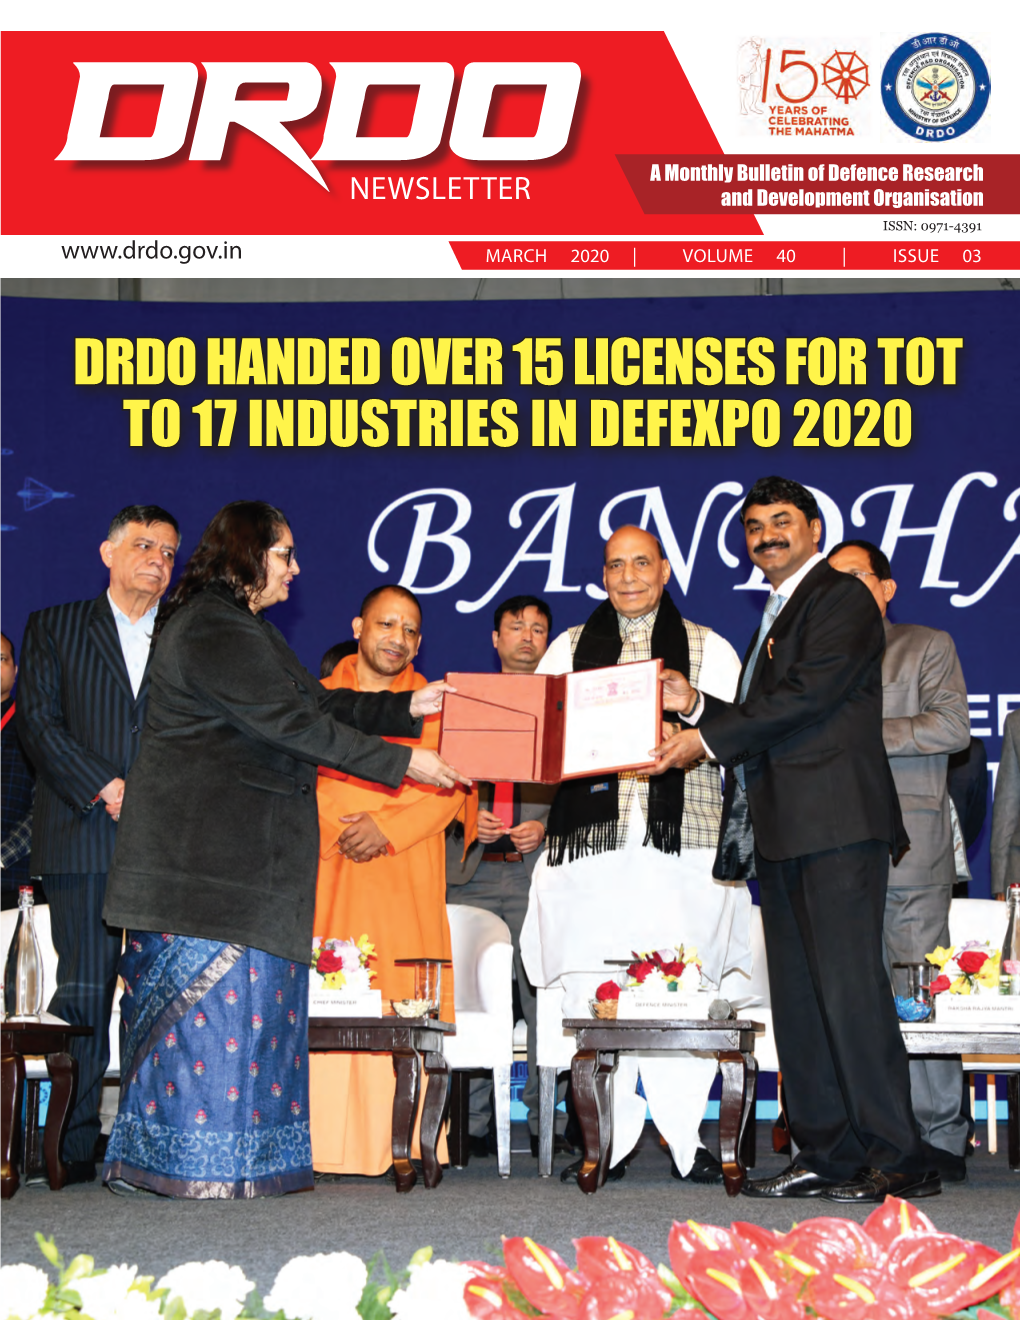 DRDO Handed Over 15 Licenses for Tot to 17 Industries in Defexpo 2020 DRDO Newsletter